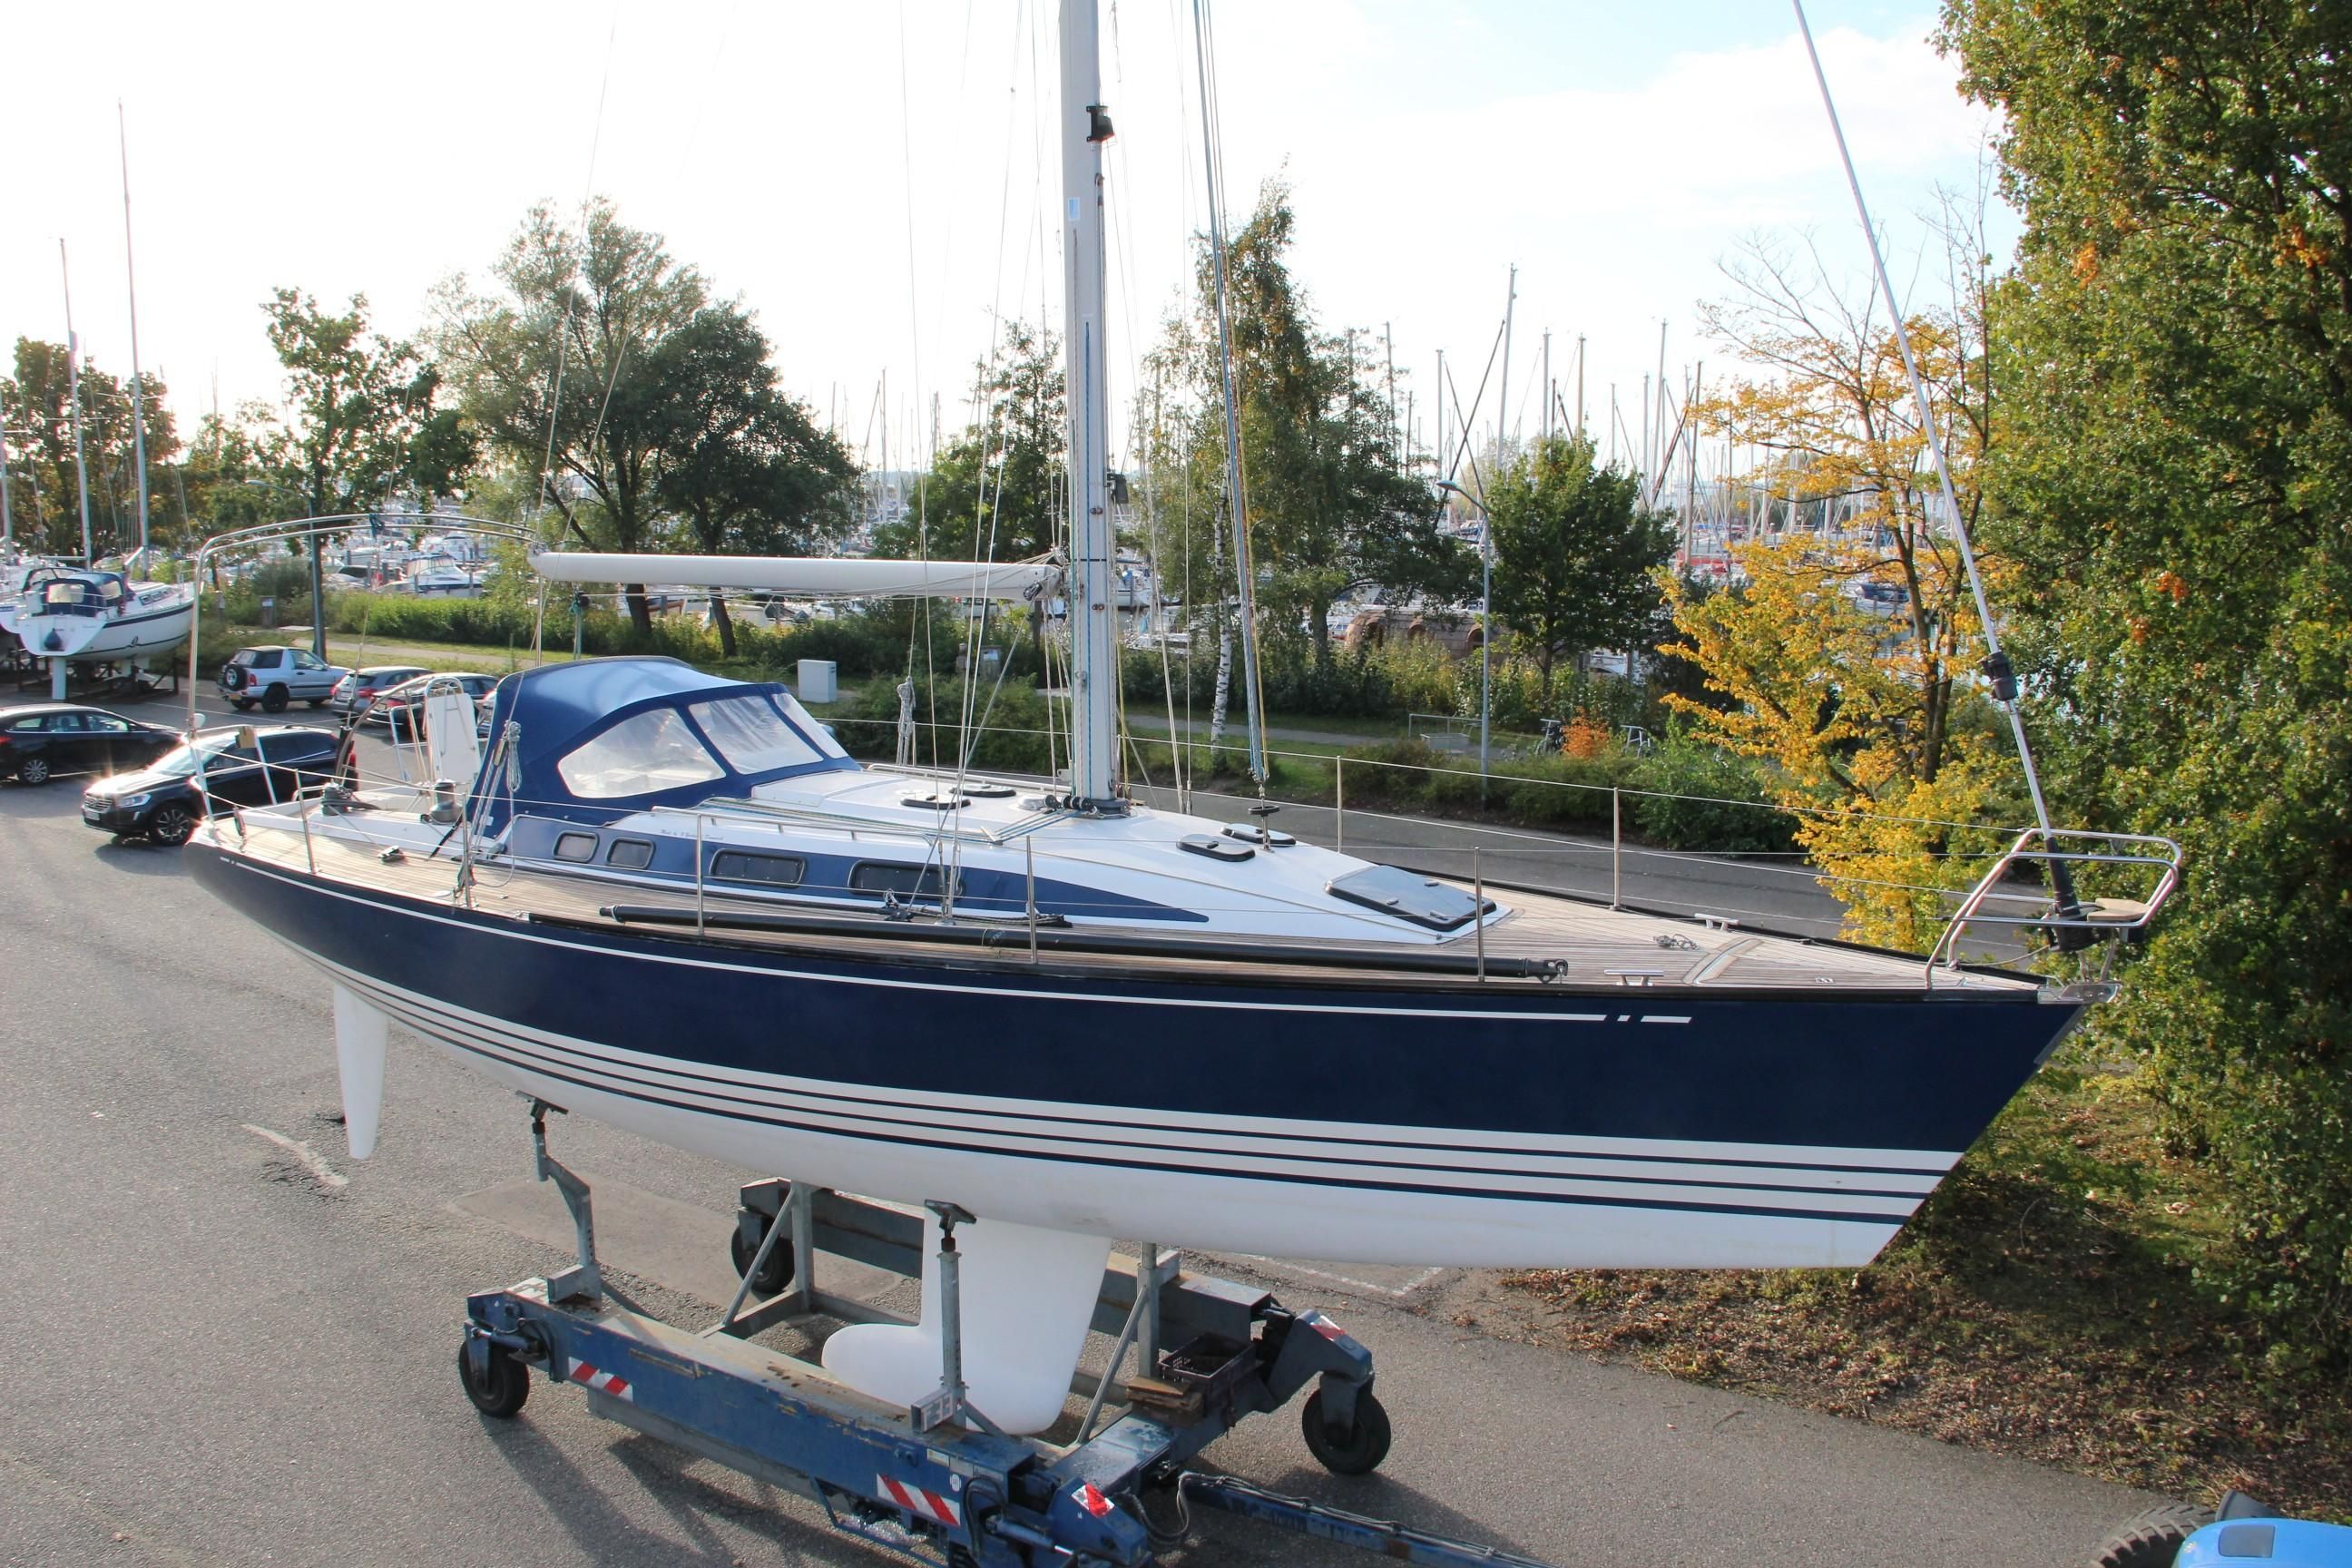 x412 yacht for sale